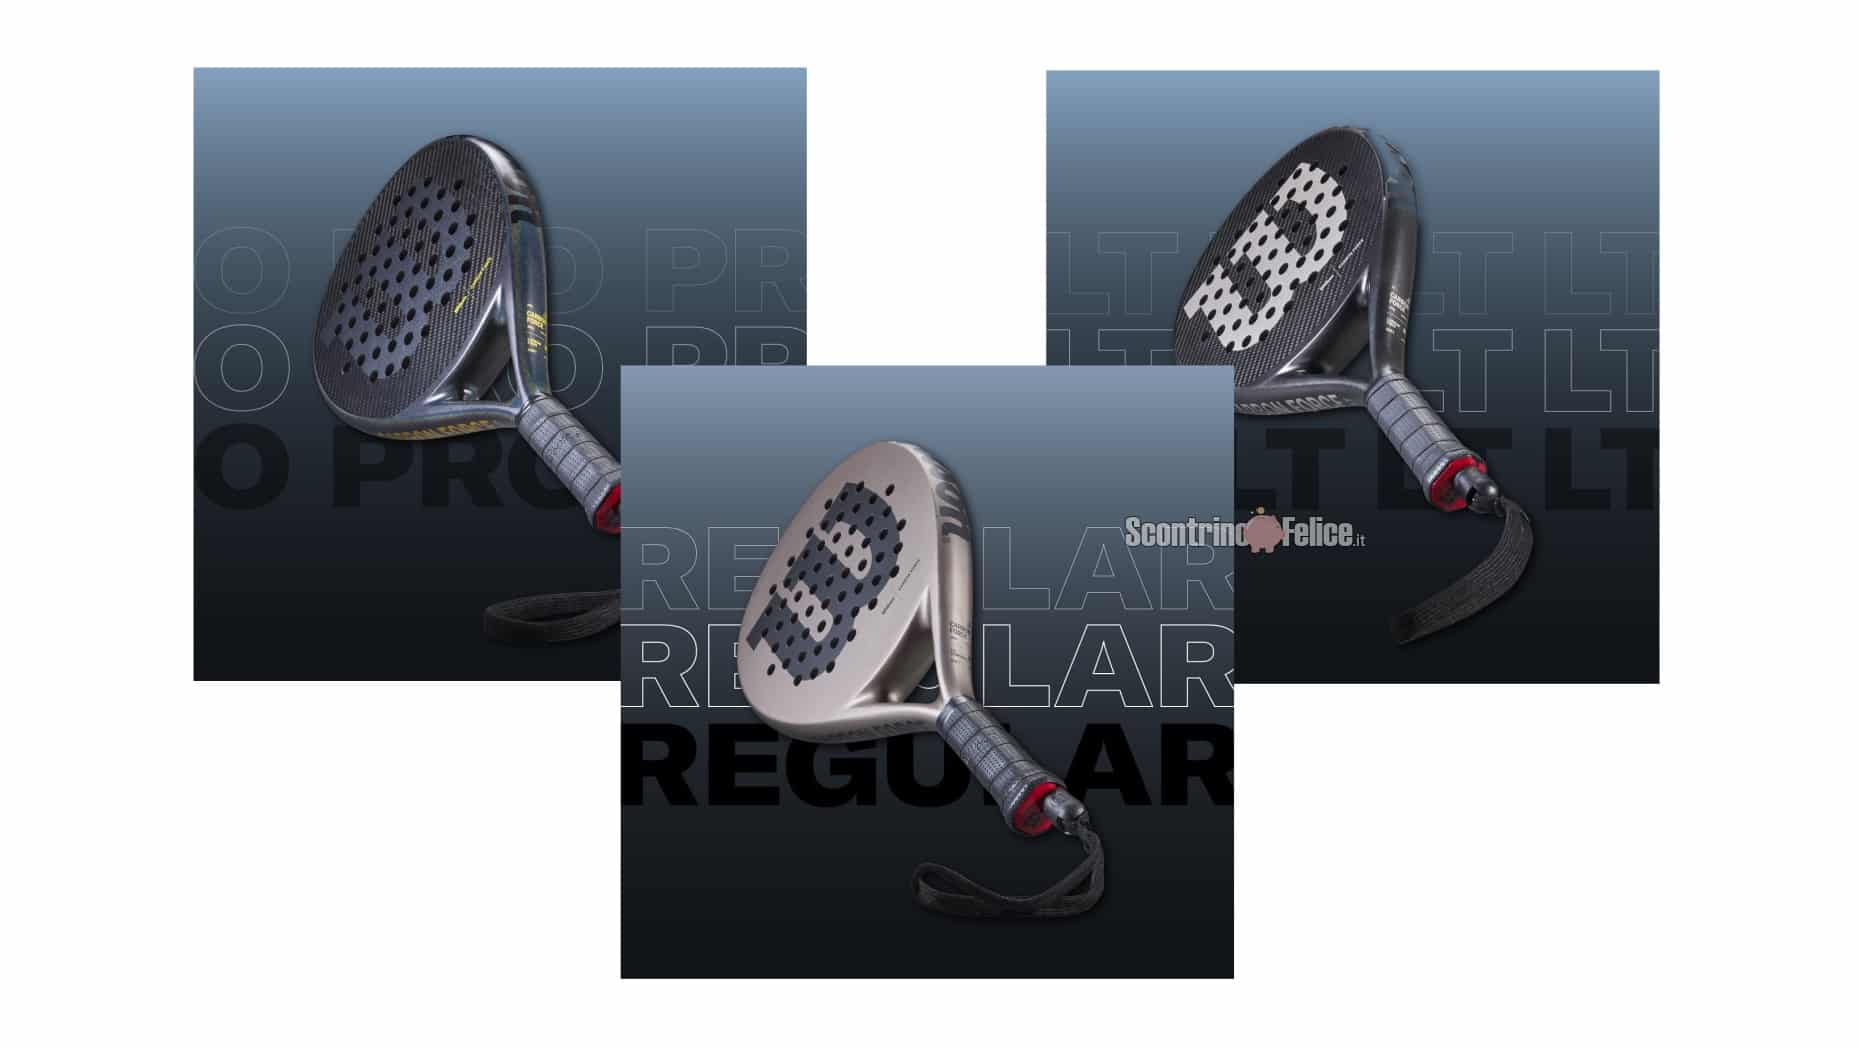 Giveaway Wilson: in palio 3 racchette Carbon Force